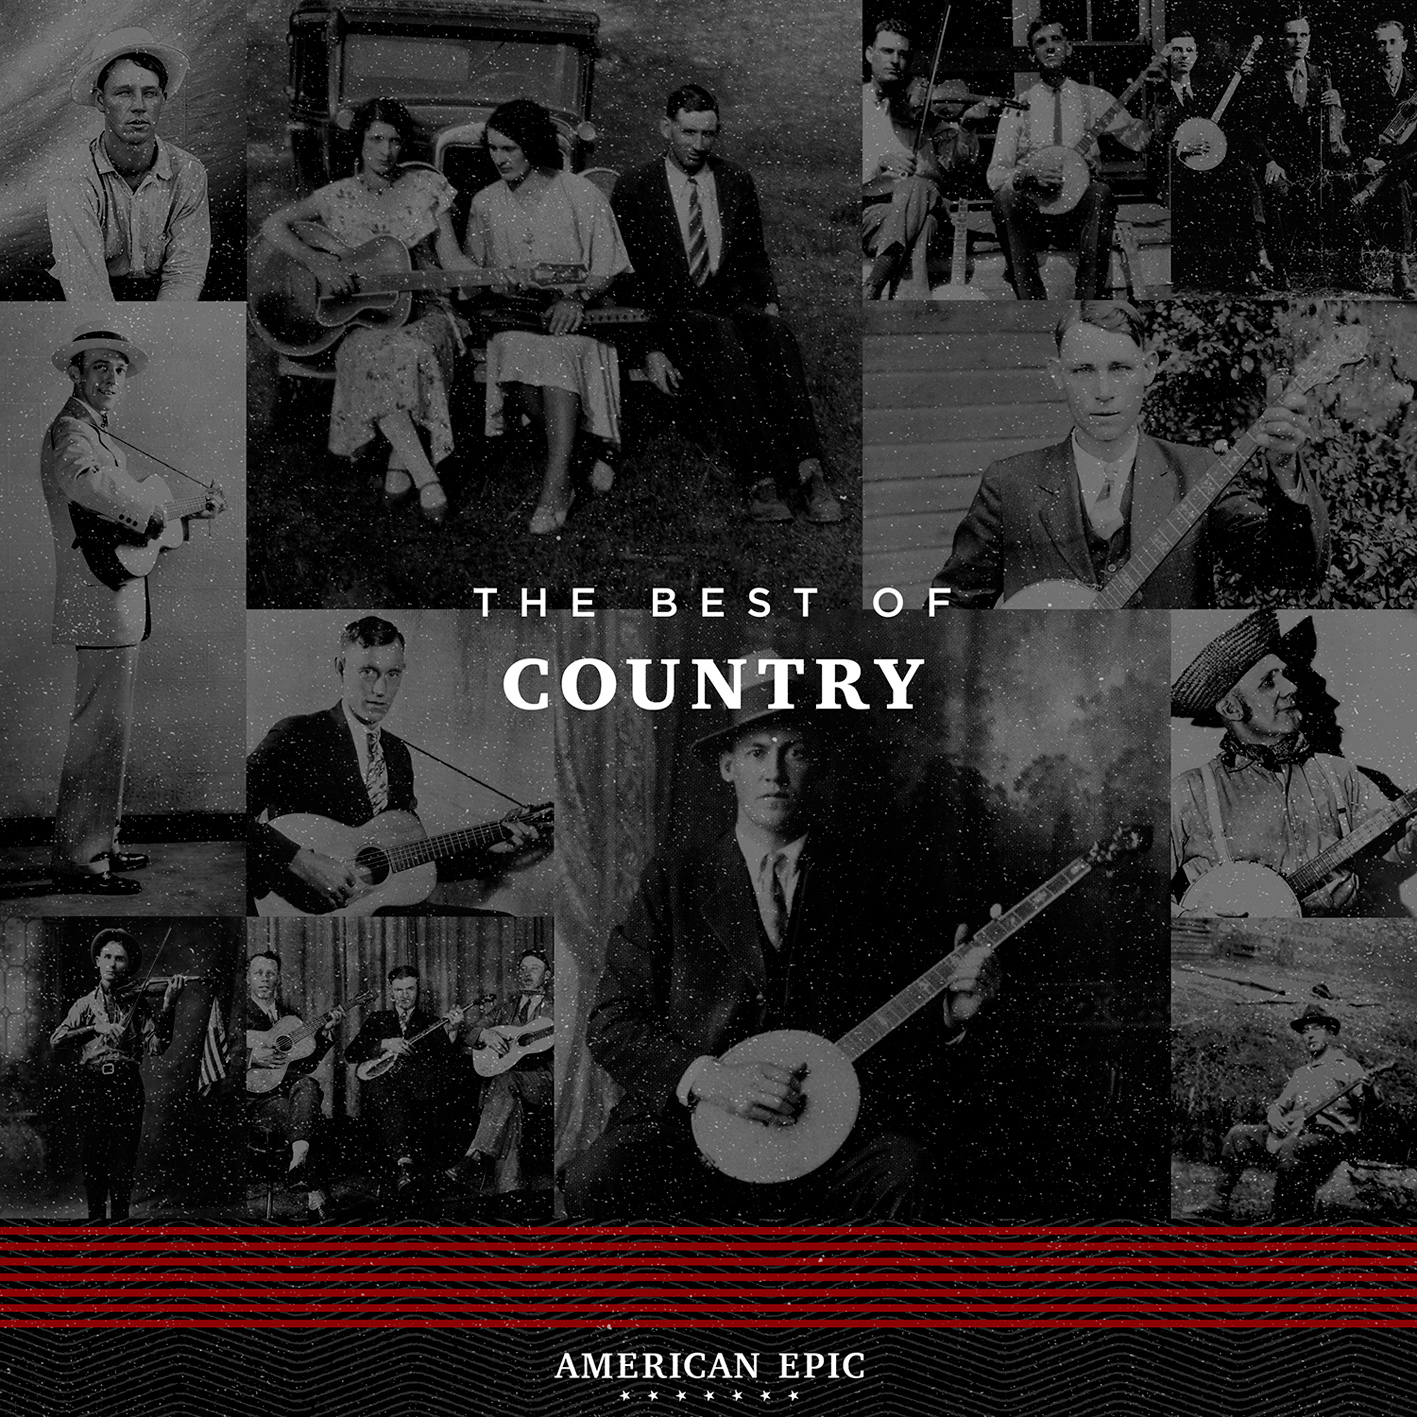 Various Artists - American Epic: The Best Of Country (2017) [HDTracks FLAC 24bit/96kHz]